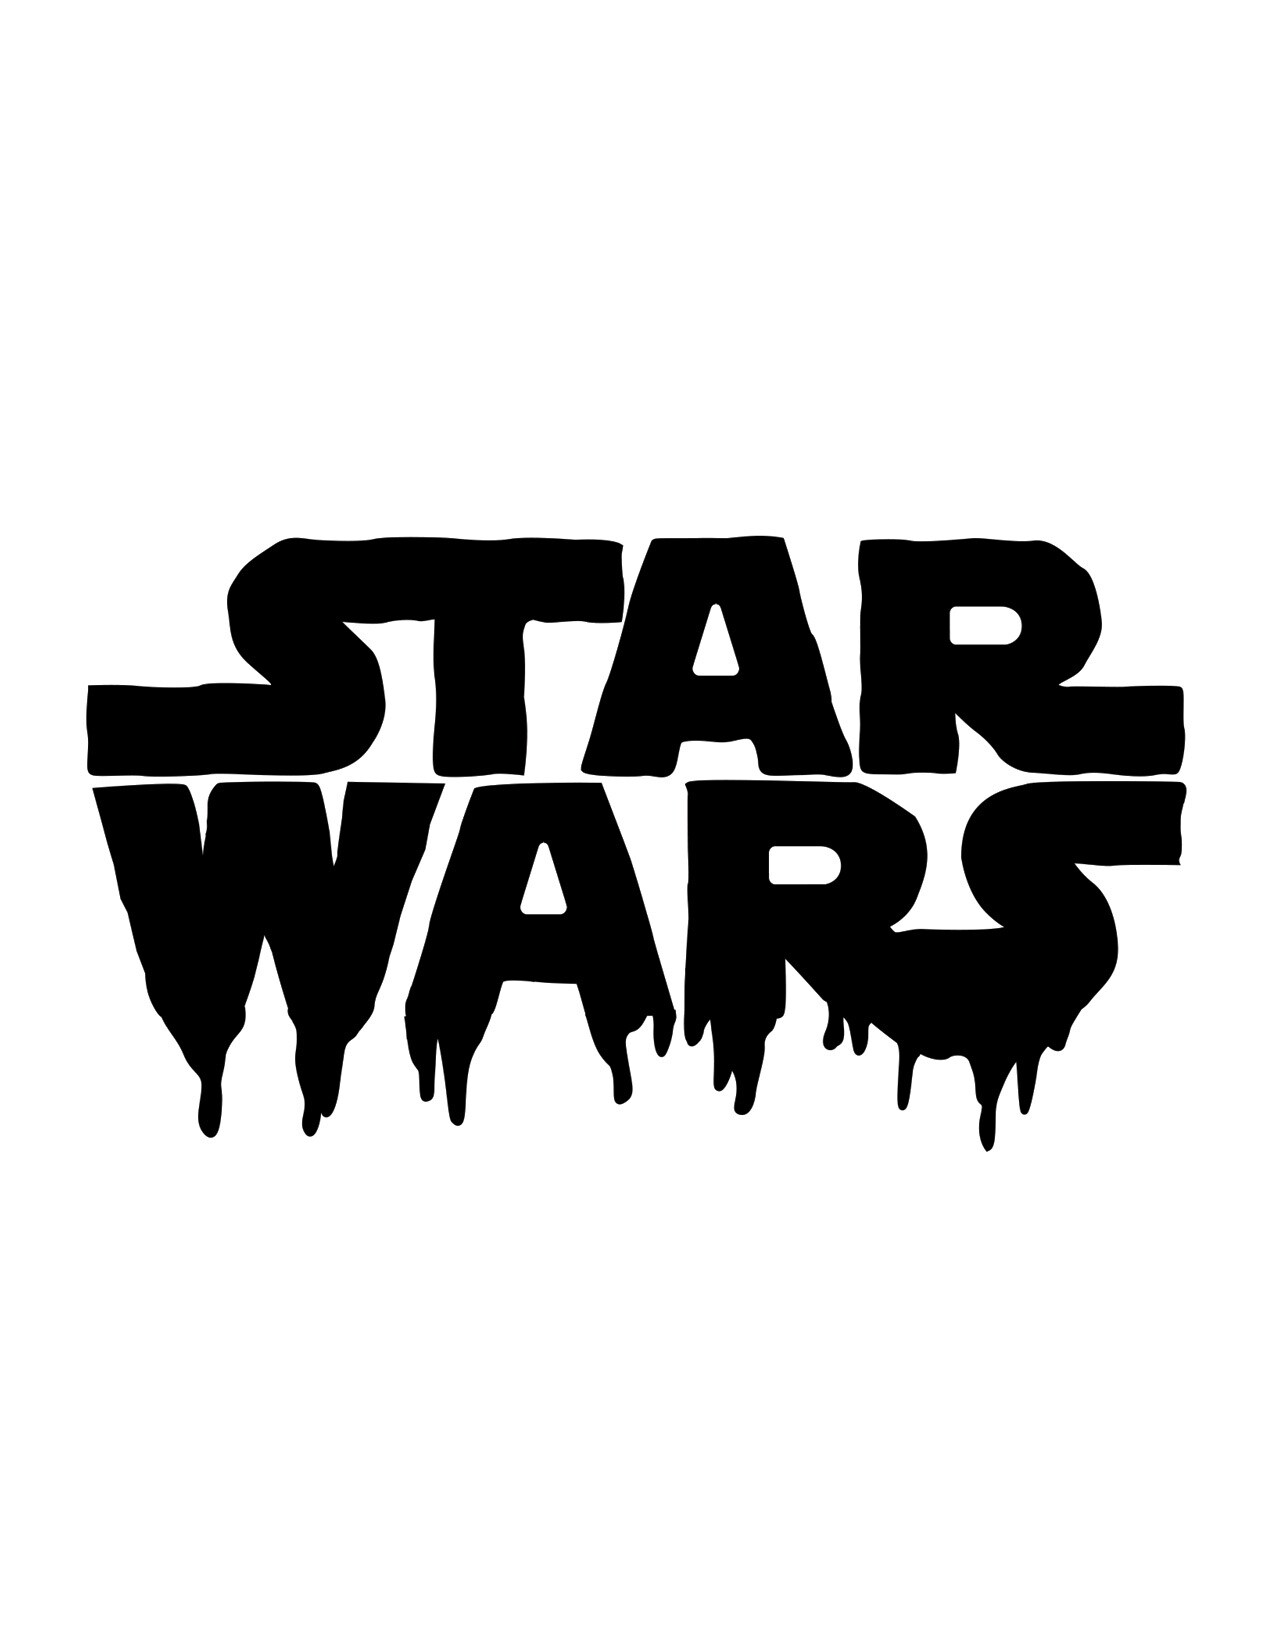 The Star Wars logo with Halloween style goop dripping from it.